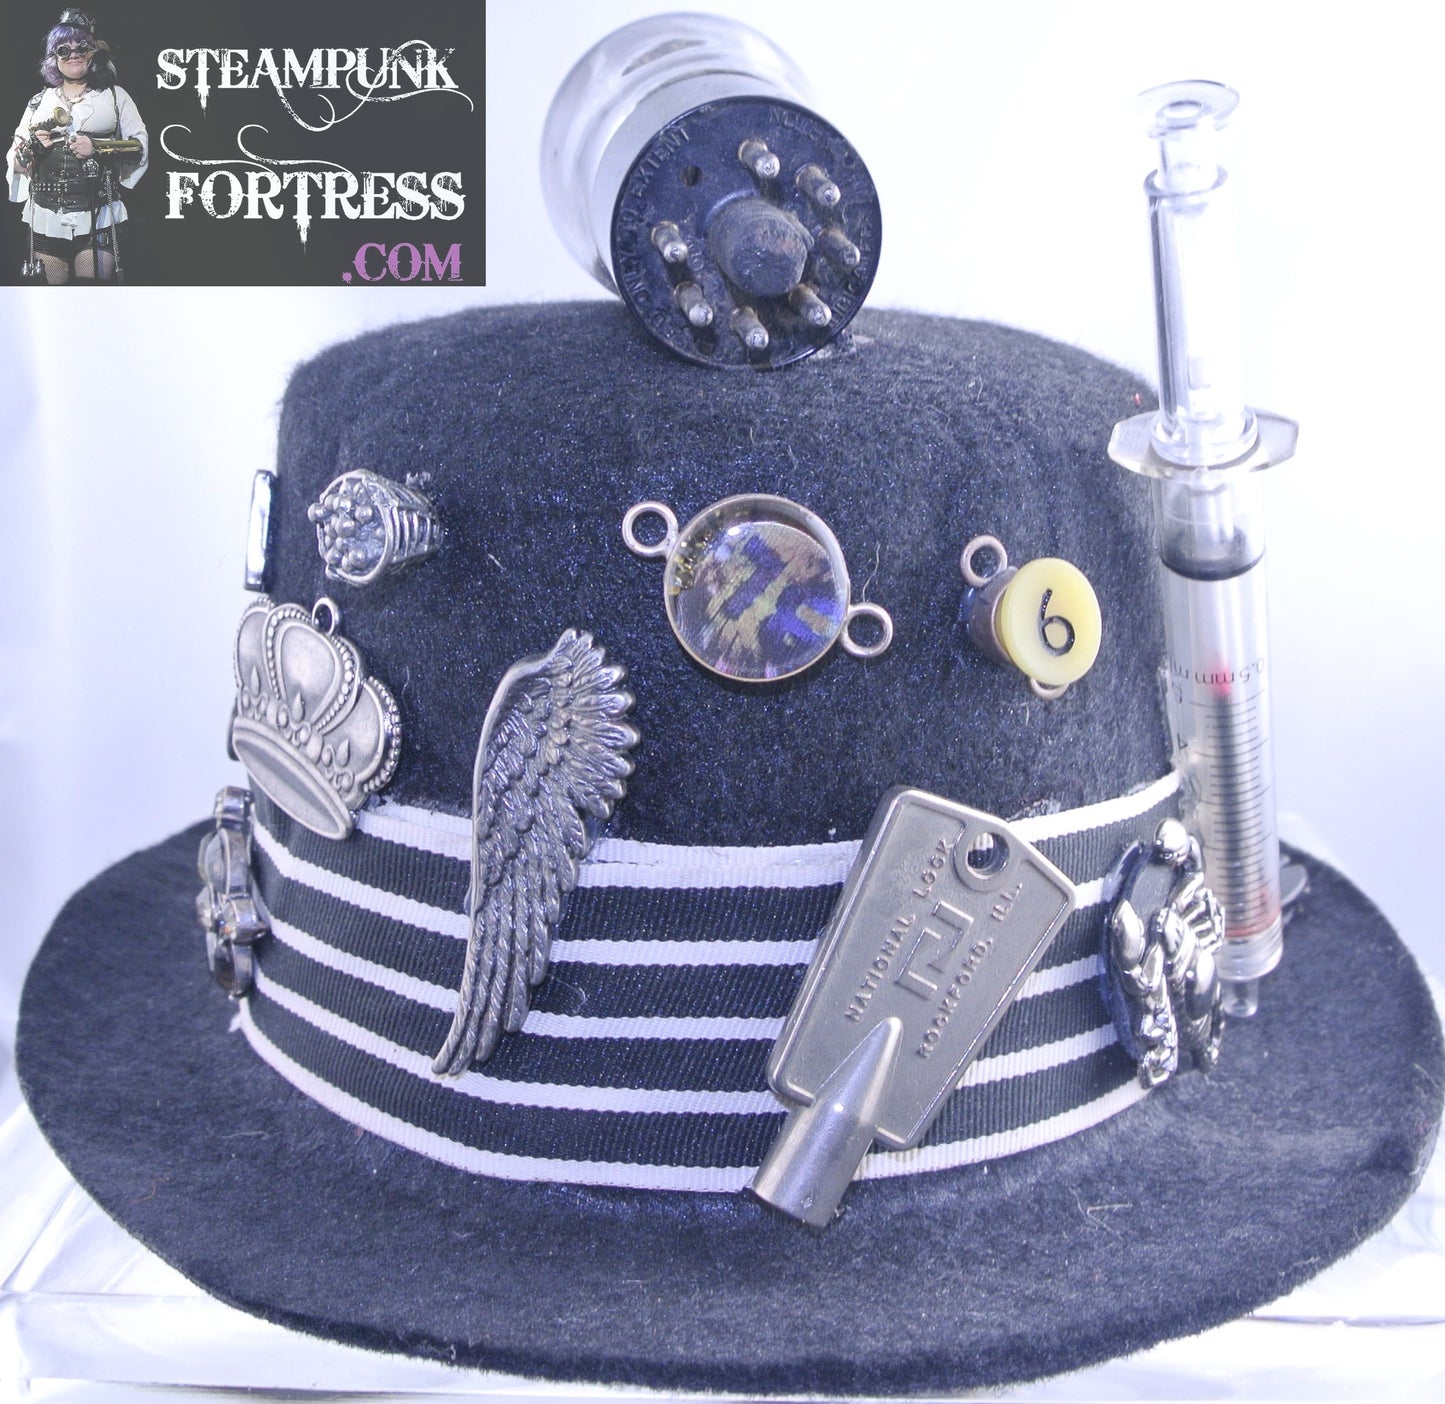 BLACK COMPASS LIVE IN MOMENT LICENSE PLATE CROWN WING KEYS SYRINGE PEN SIGN SKULL THIMBLE HEART BASKET OF NEEDLES SCORPION MISCELLANEOUS CHARMS ROCKET TOP BLACK WHITE STRIPED RIBBON LARGE TOP HAT STARR WILDE STEAMPUNK FORTRESS